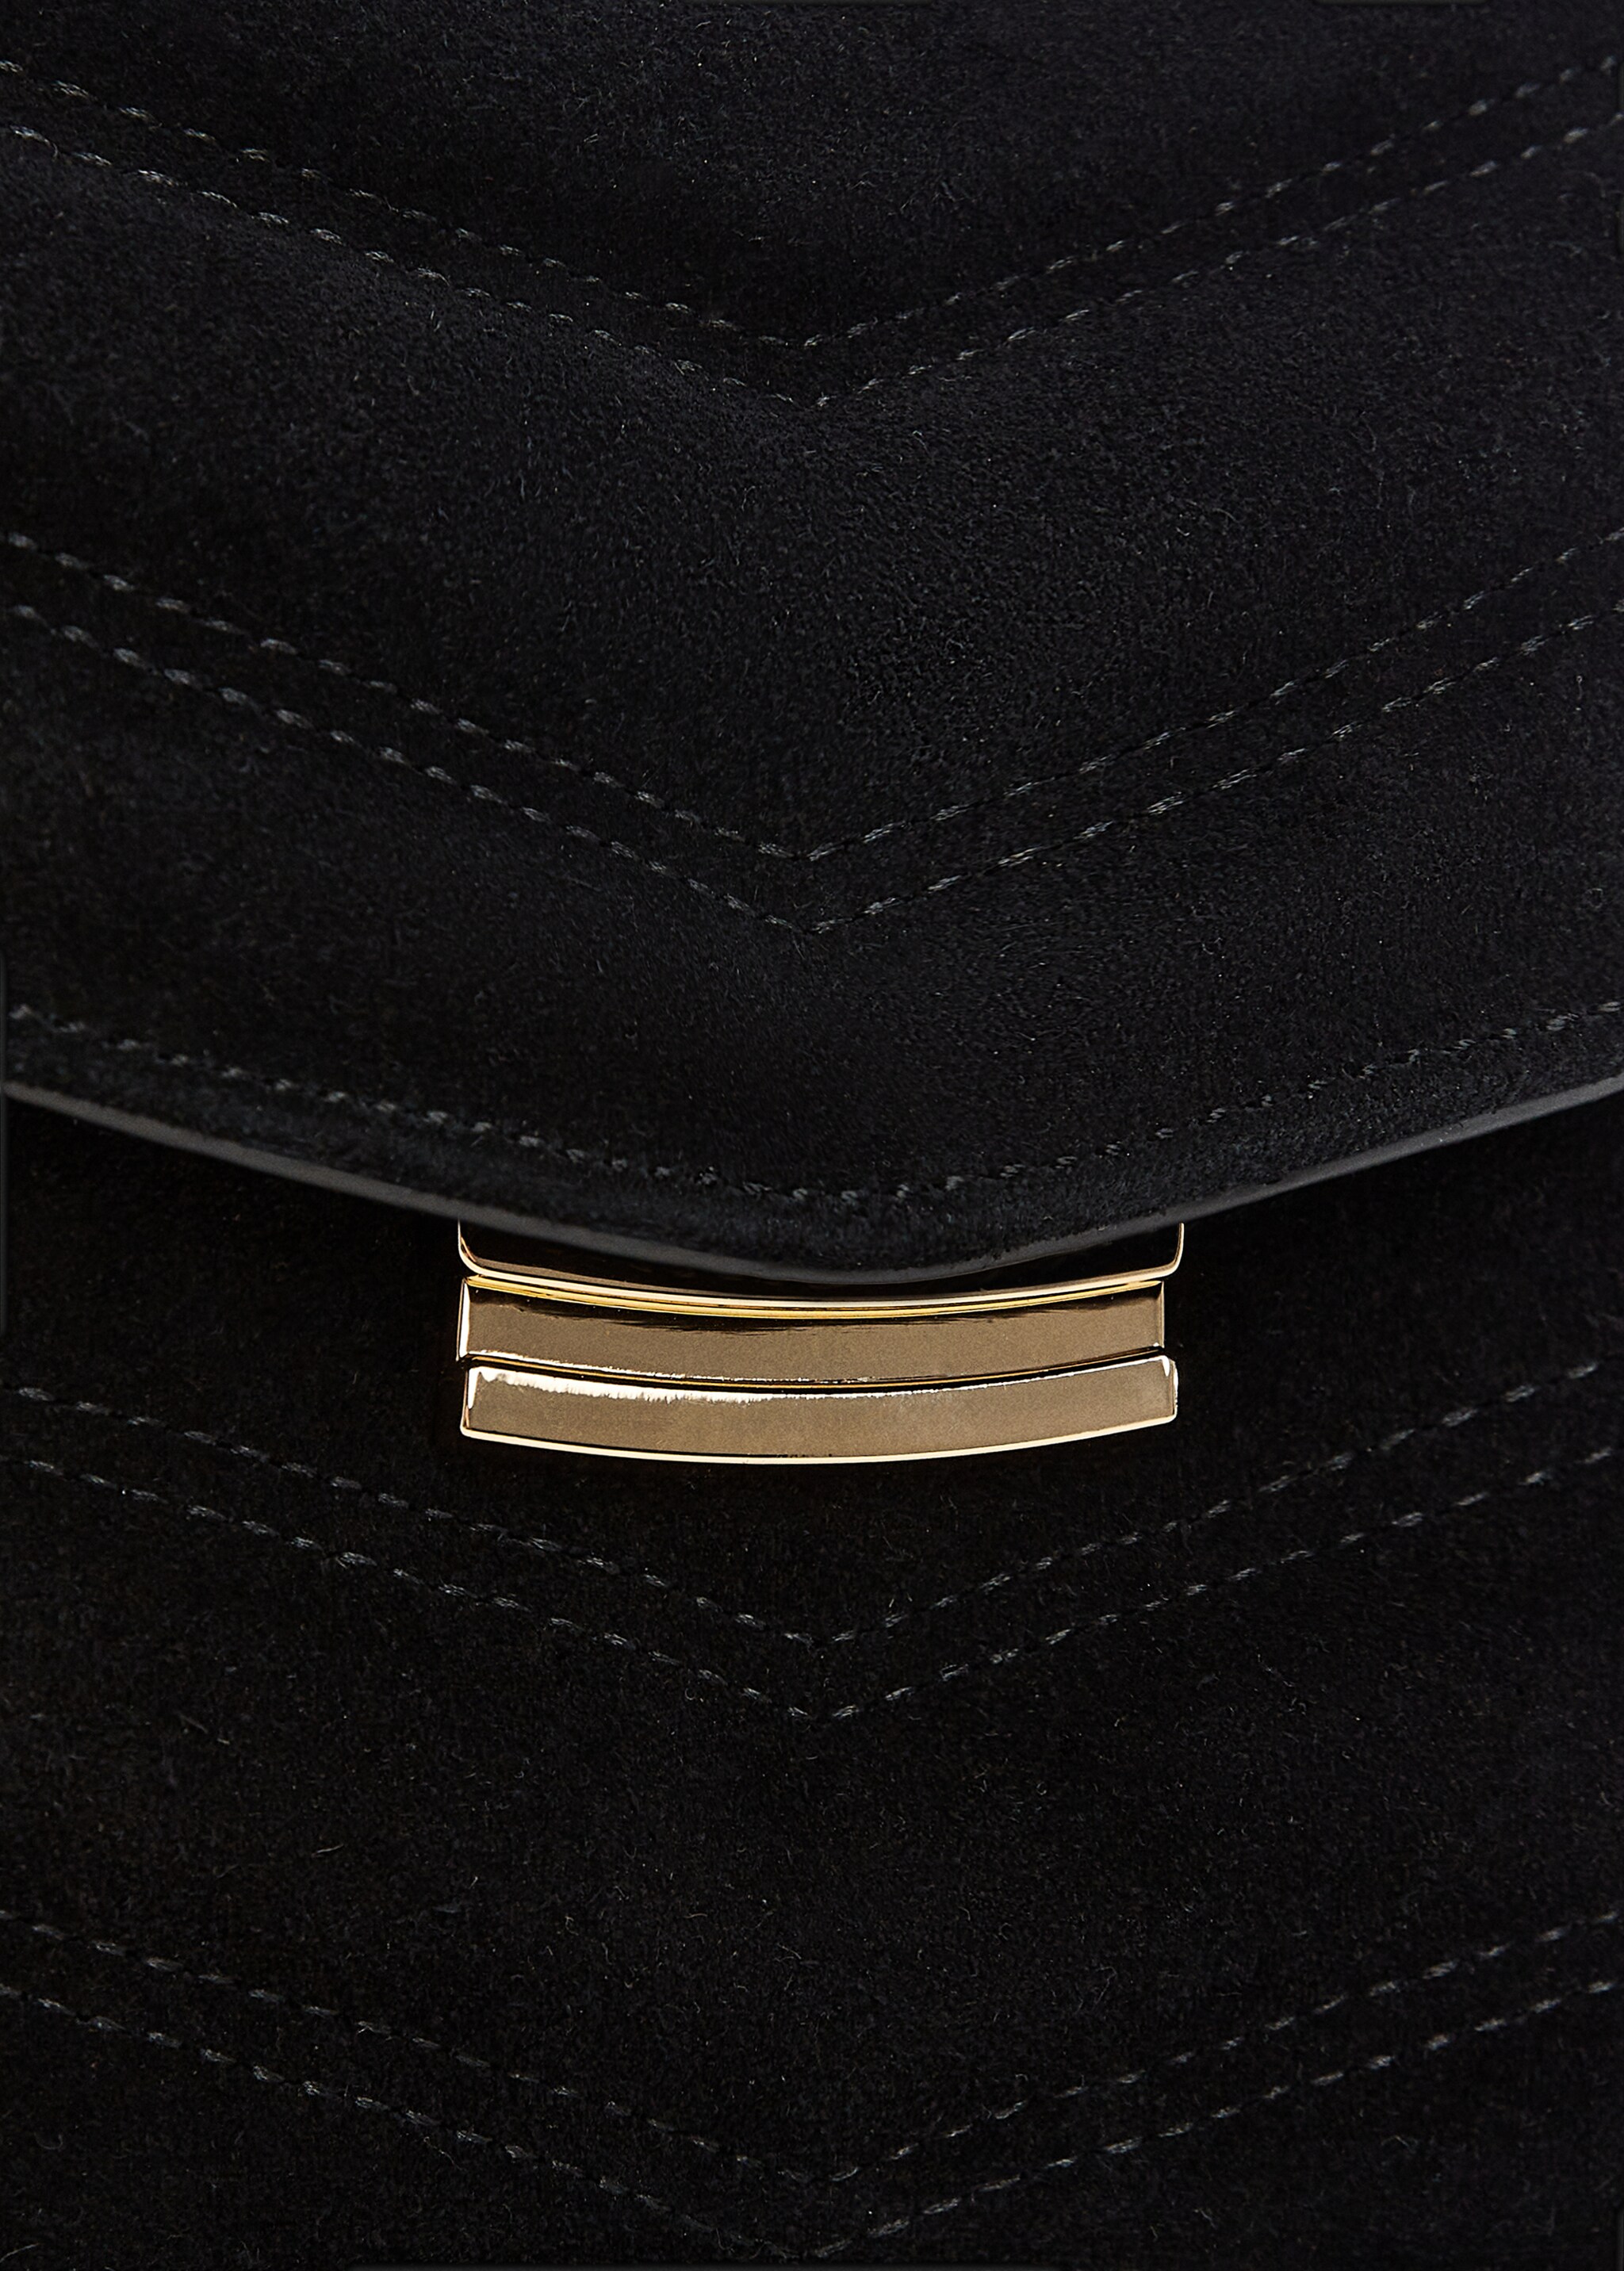 Chain leather bag - Details of the article 2